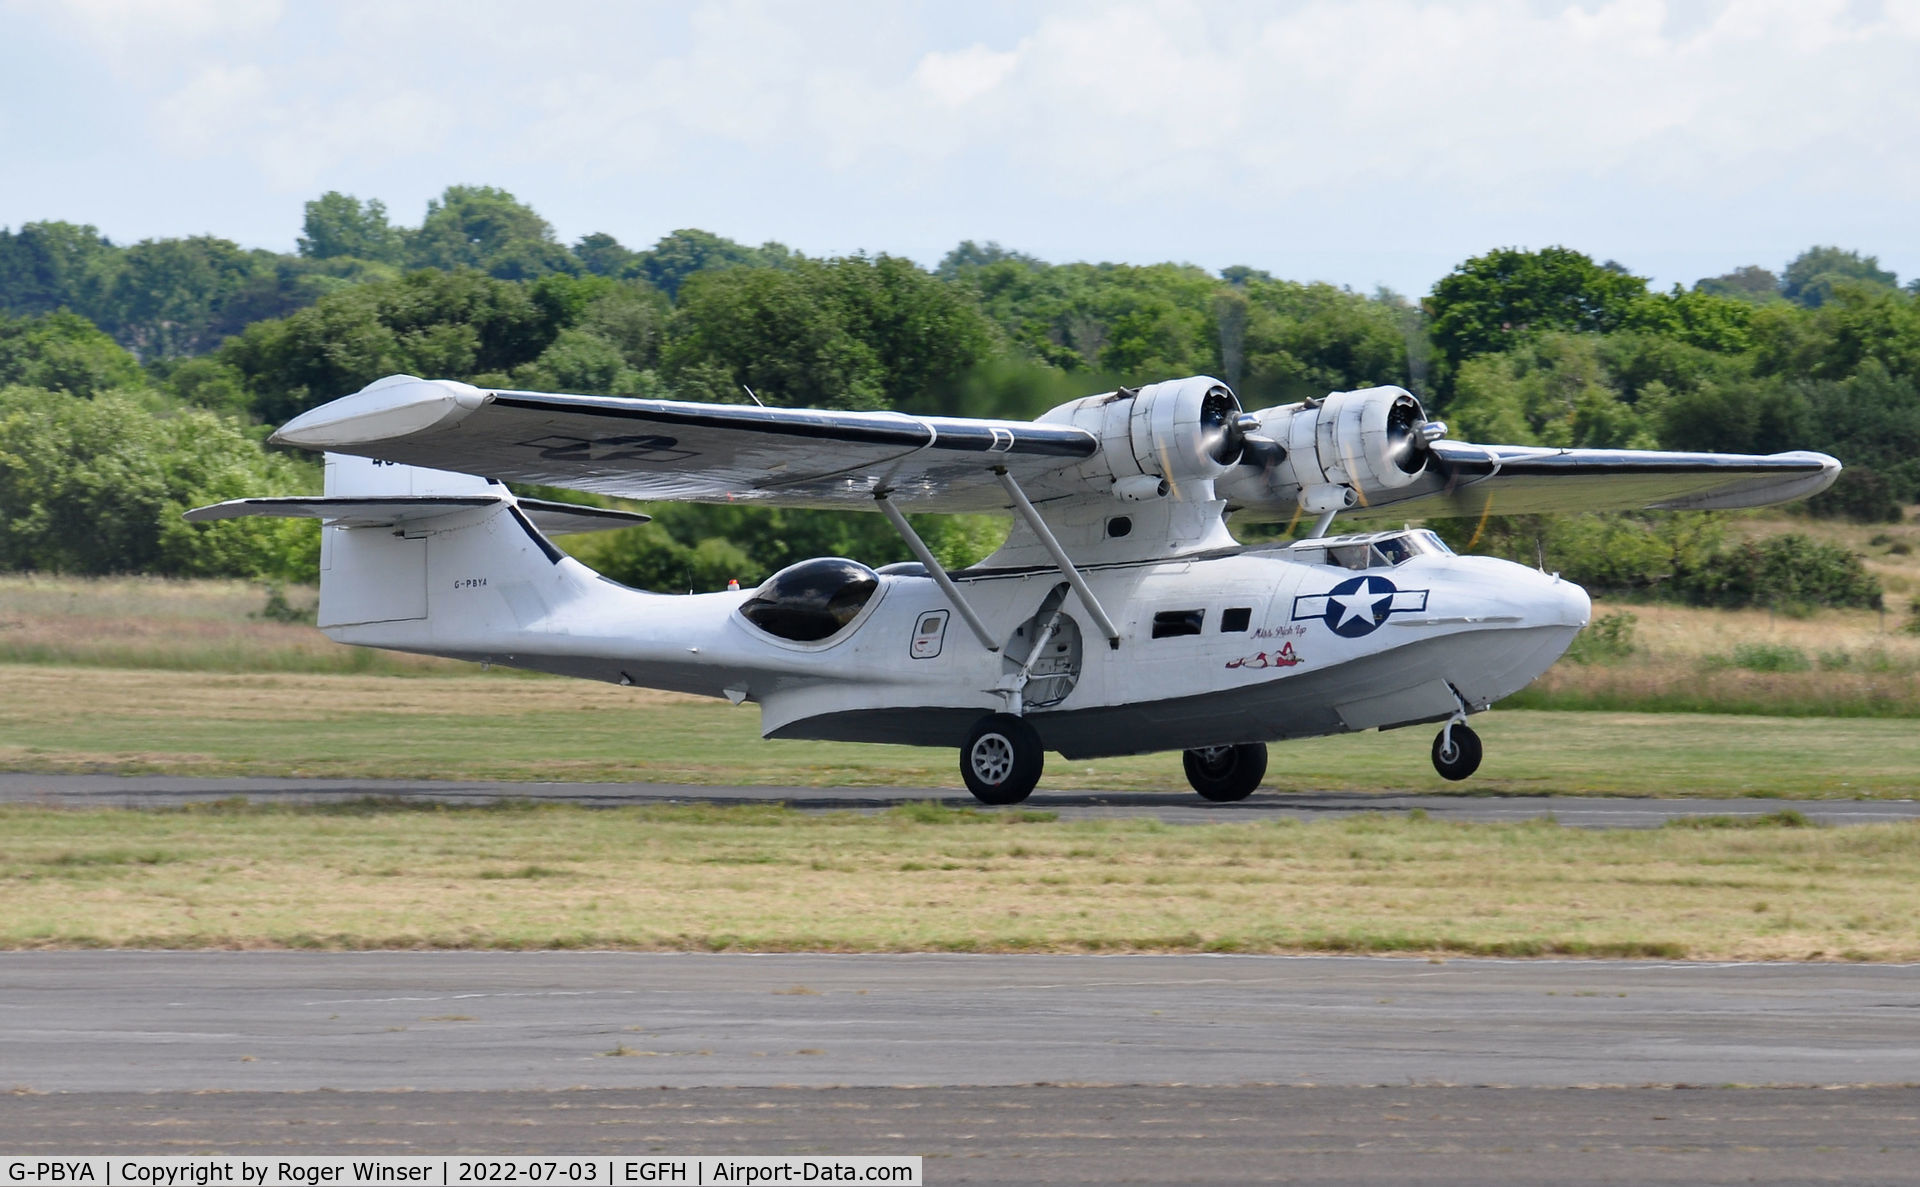 G-PBYA, 1944 Consolidated (Canadian Vickers) PBV-1A Canso A C/N CV-283, Visiting PBY-1A Canso departing Runway 28 to display on day 2 of the Wales Airshow 2022.